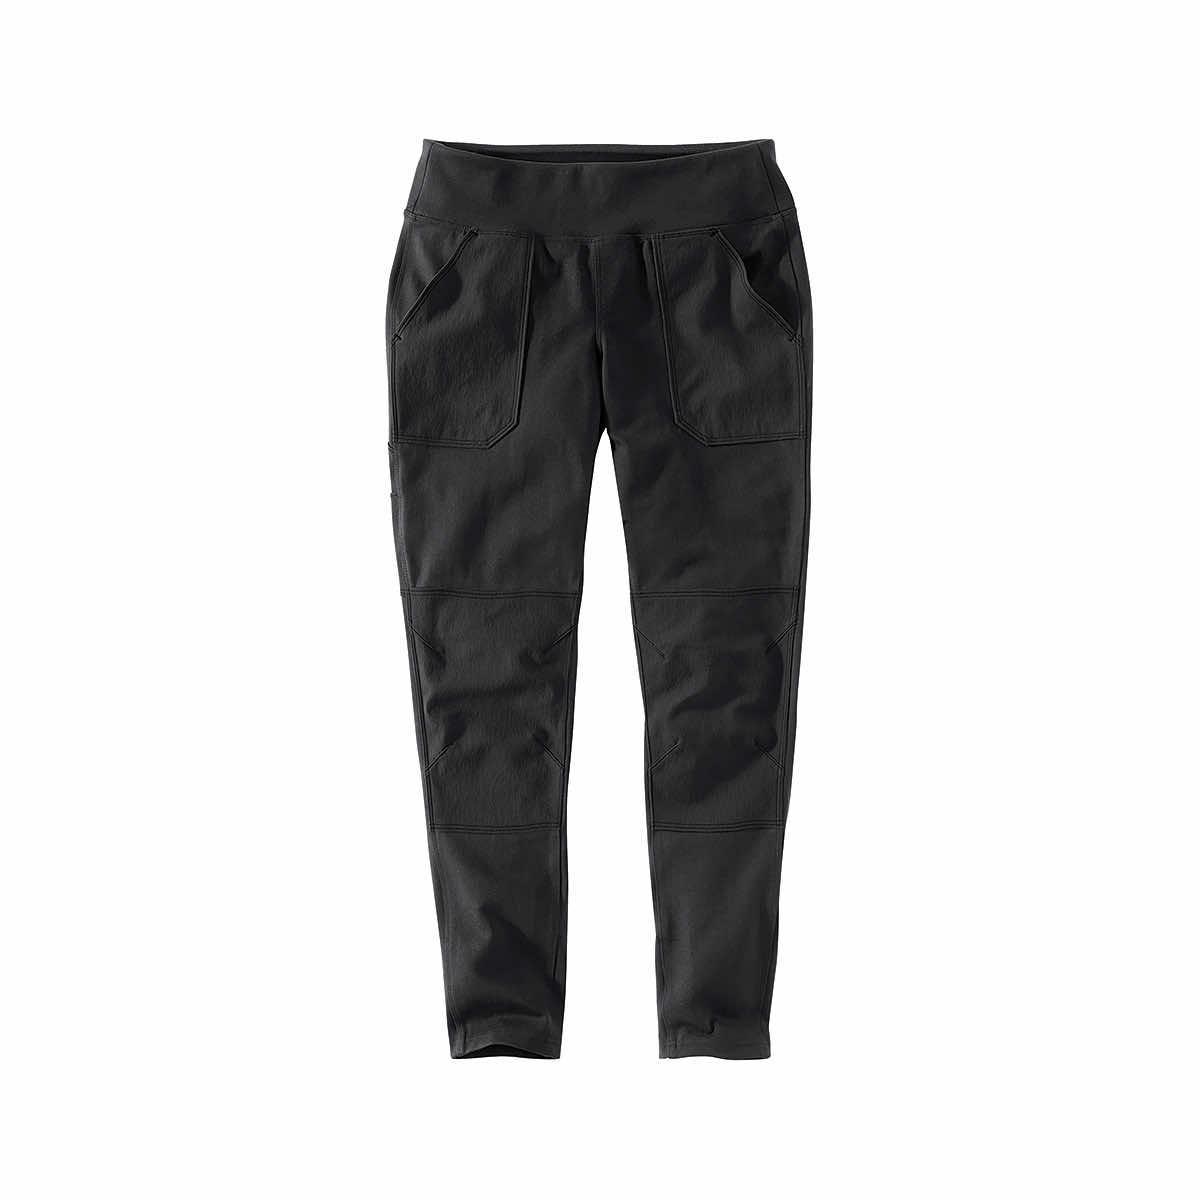 Carhartt leggings are built to be durable, comfortable, and ready